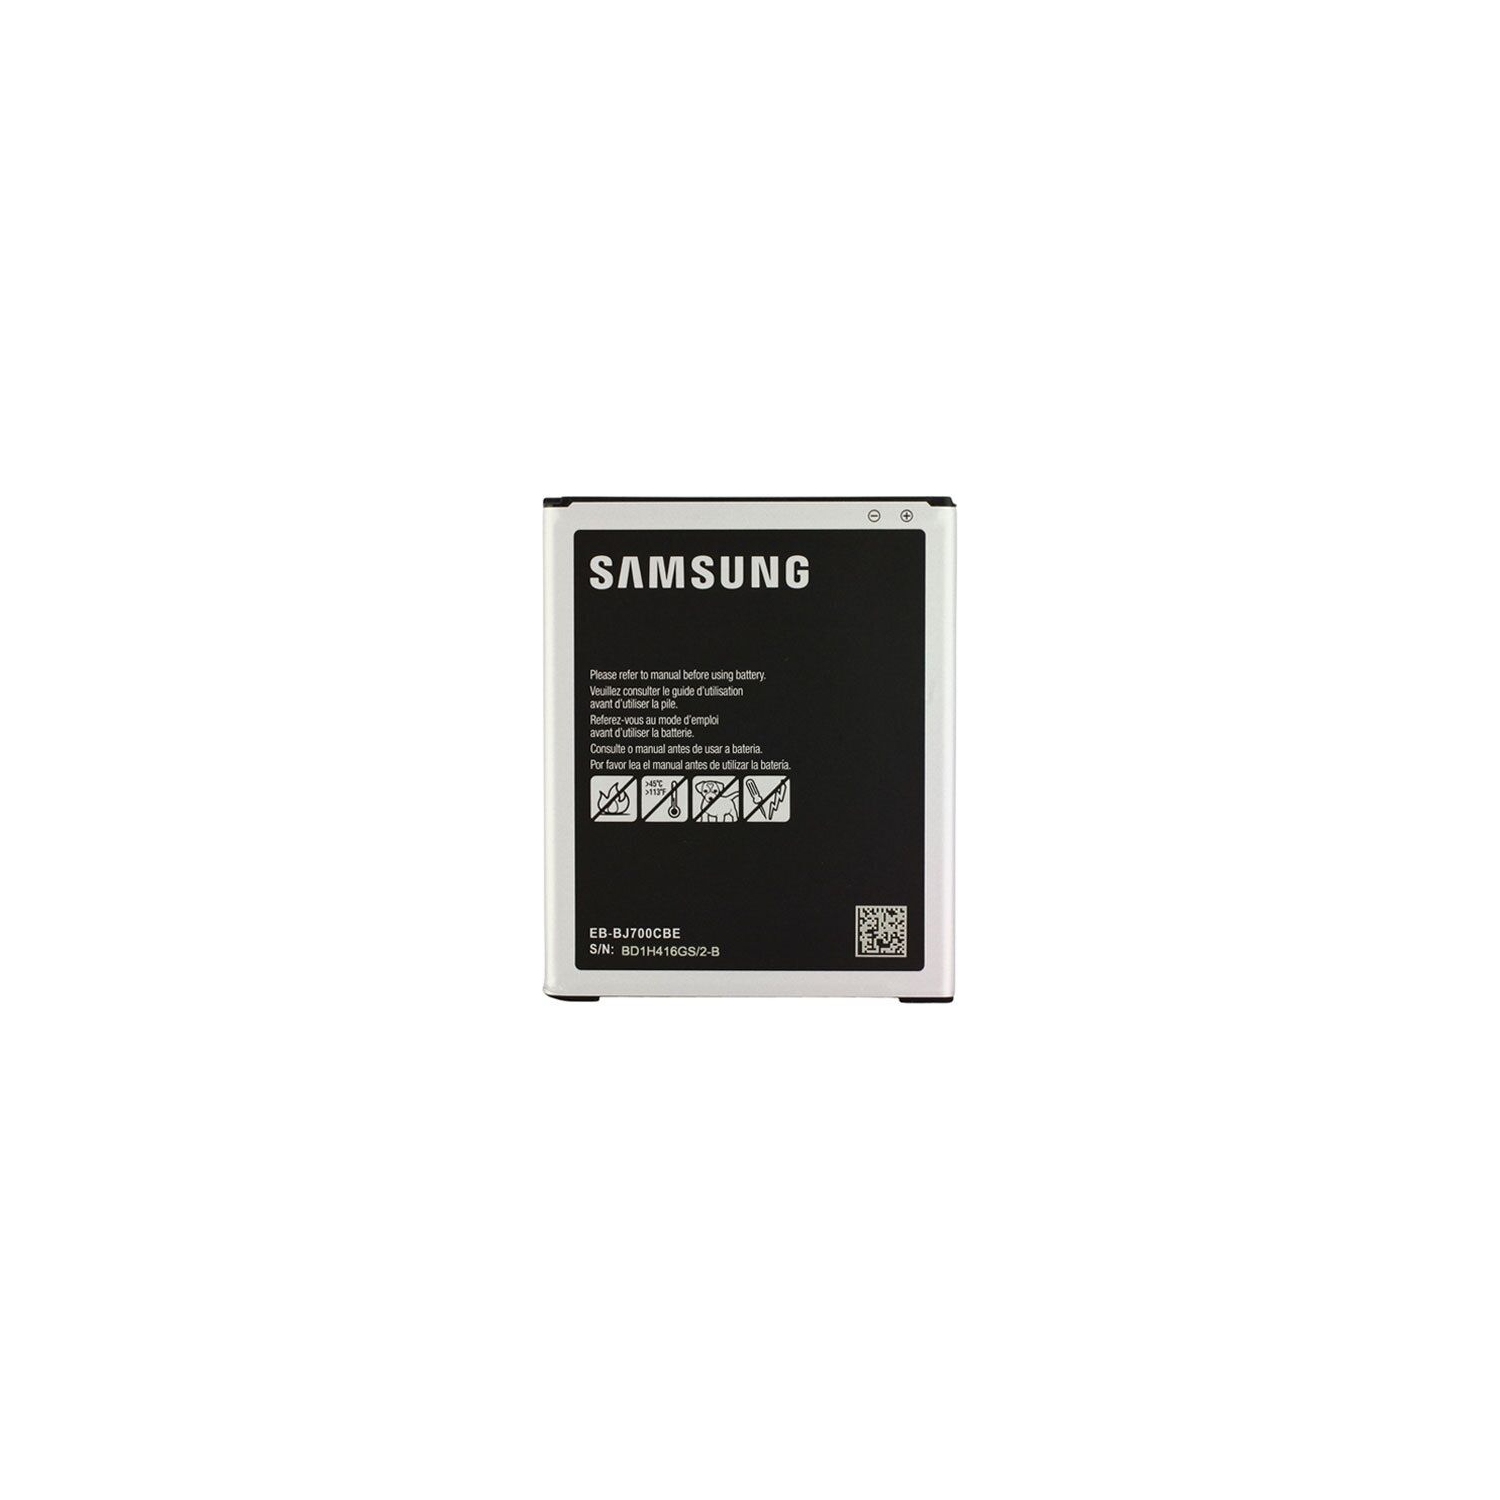 (Cableshark) For Samsung Compatible Galaxy J7 2015 On7 Battery + NFC SM-J700M/F EB-BJ700CBE 3000mAh (FREE SHIPPING)